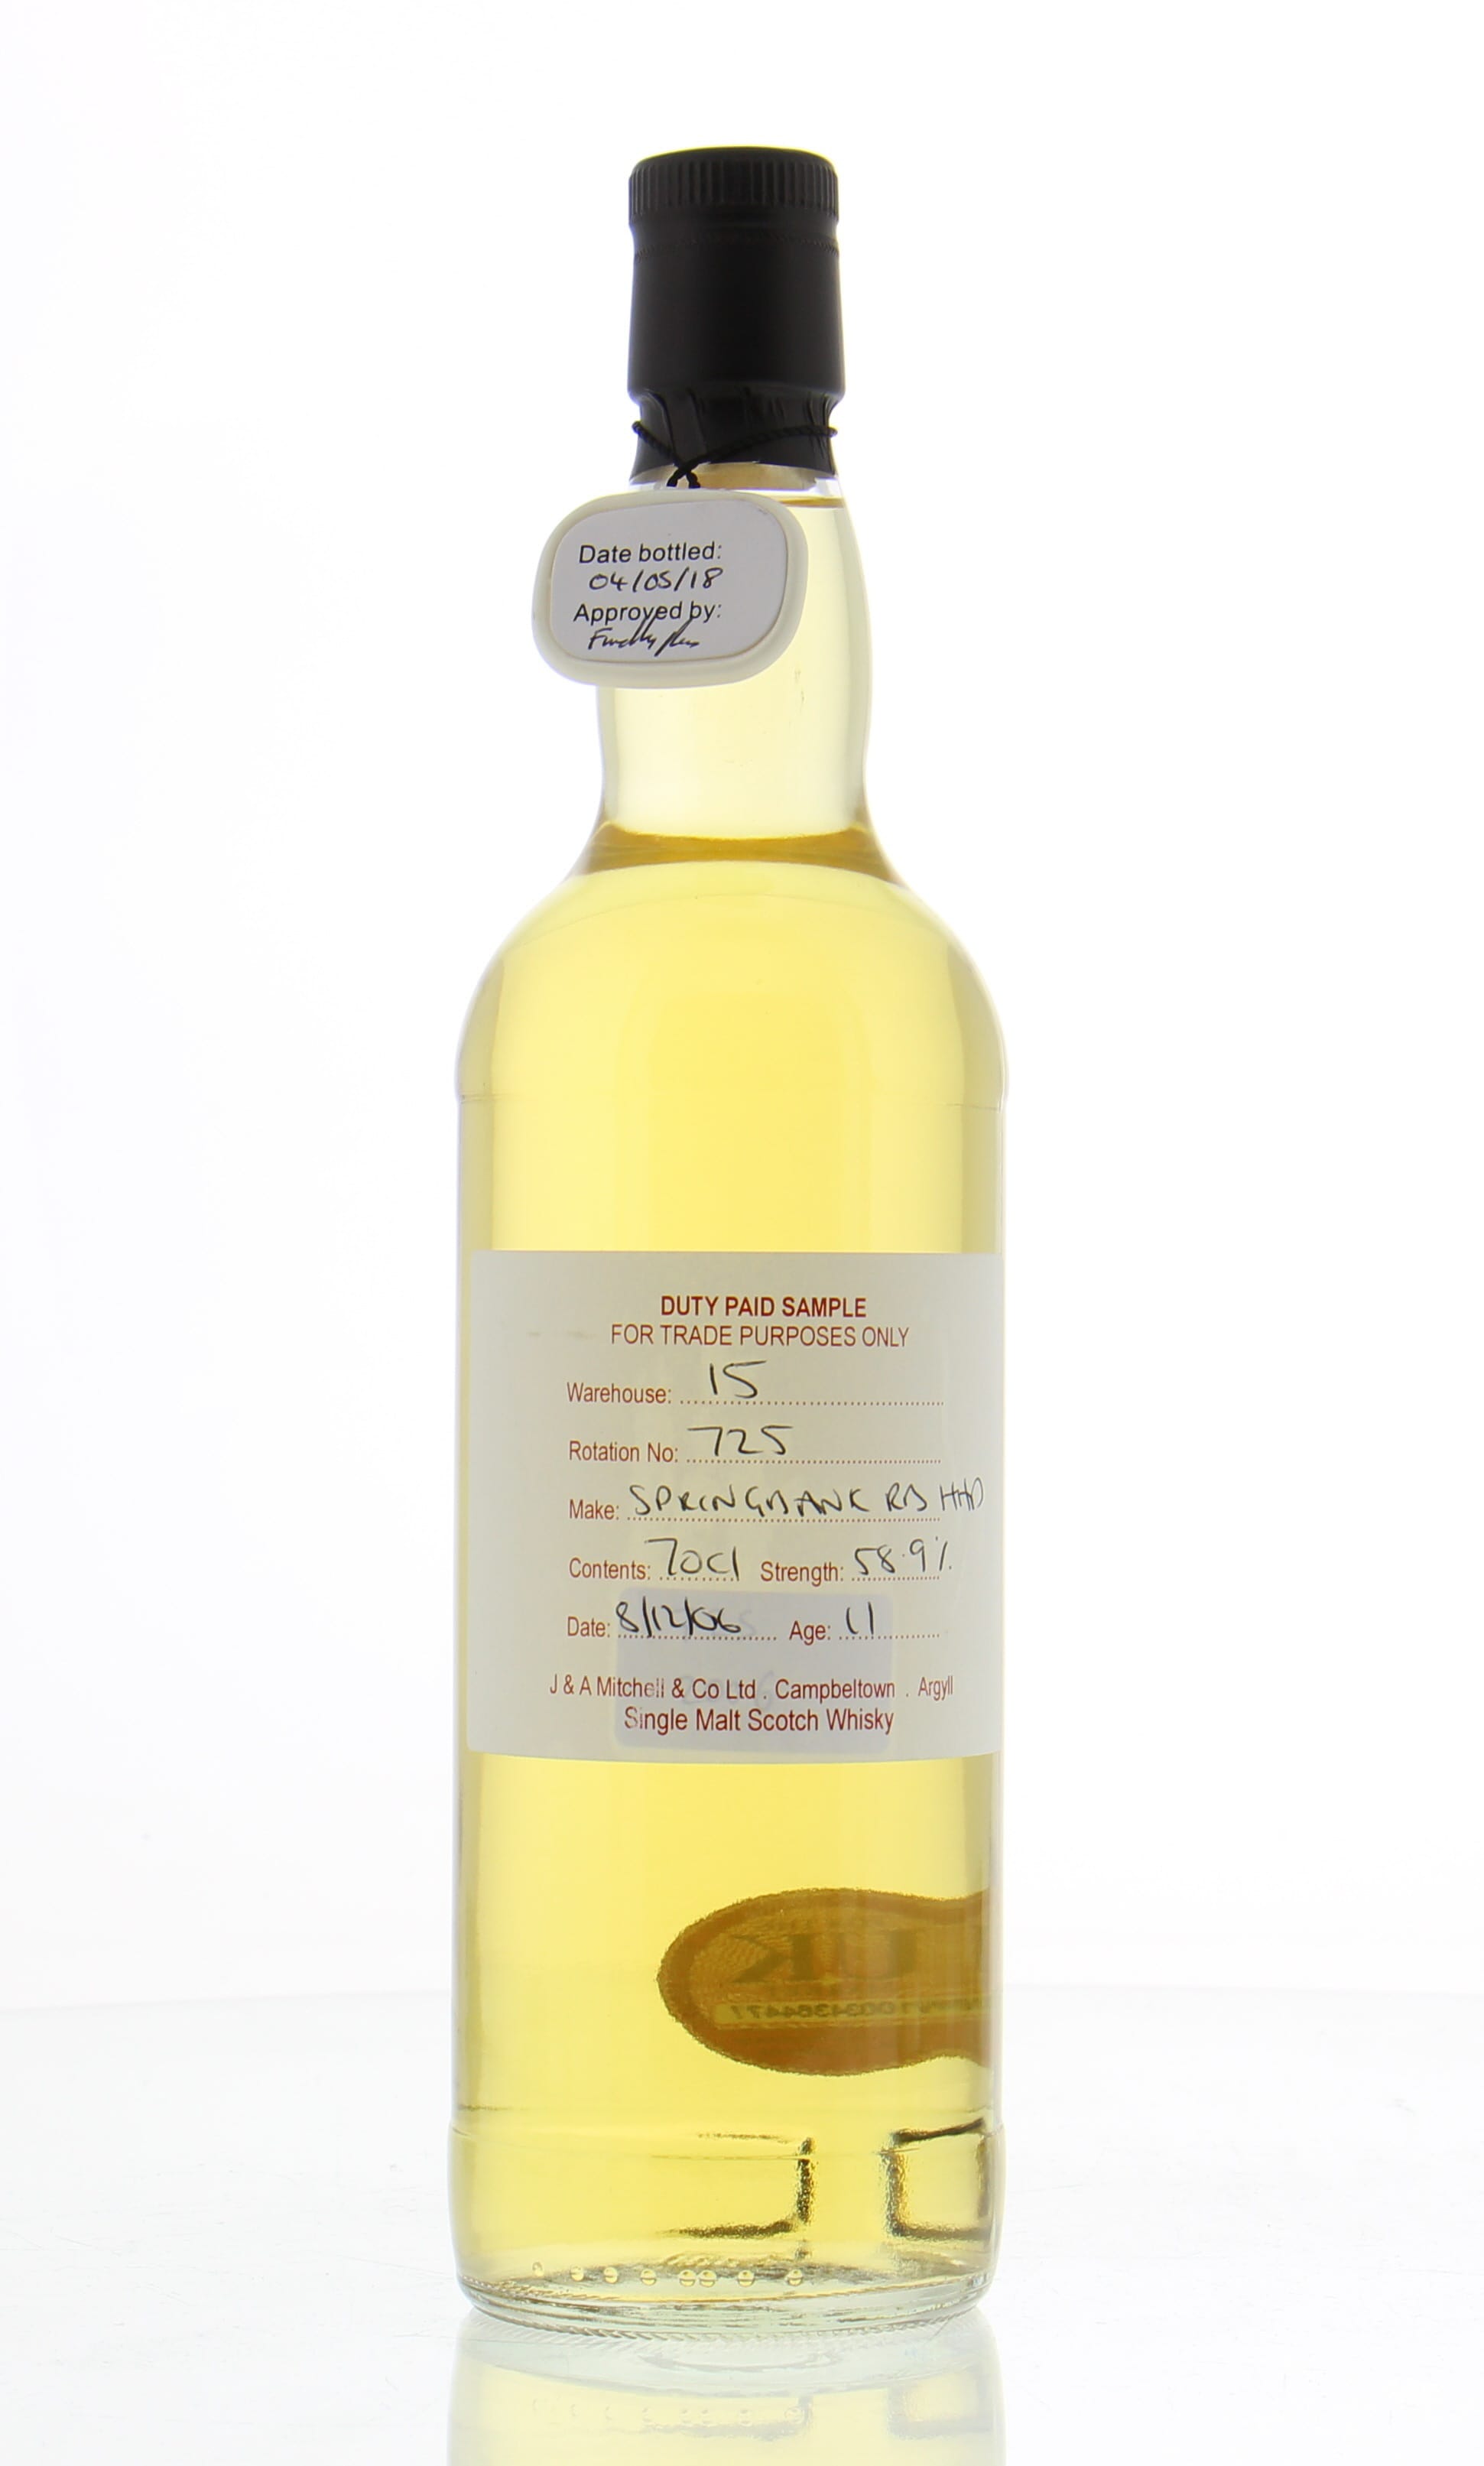 Springbank - 11 Years Old Duty Paid Sample Warehouse 15 Rotation 725 58.9% 2006 Perfect